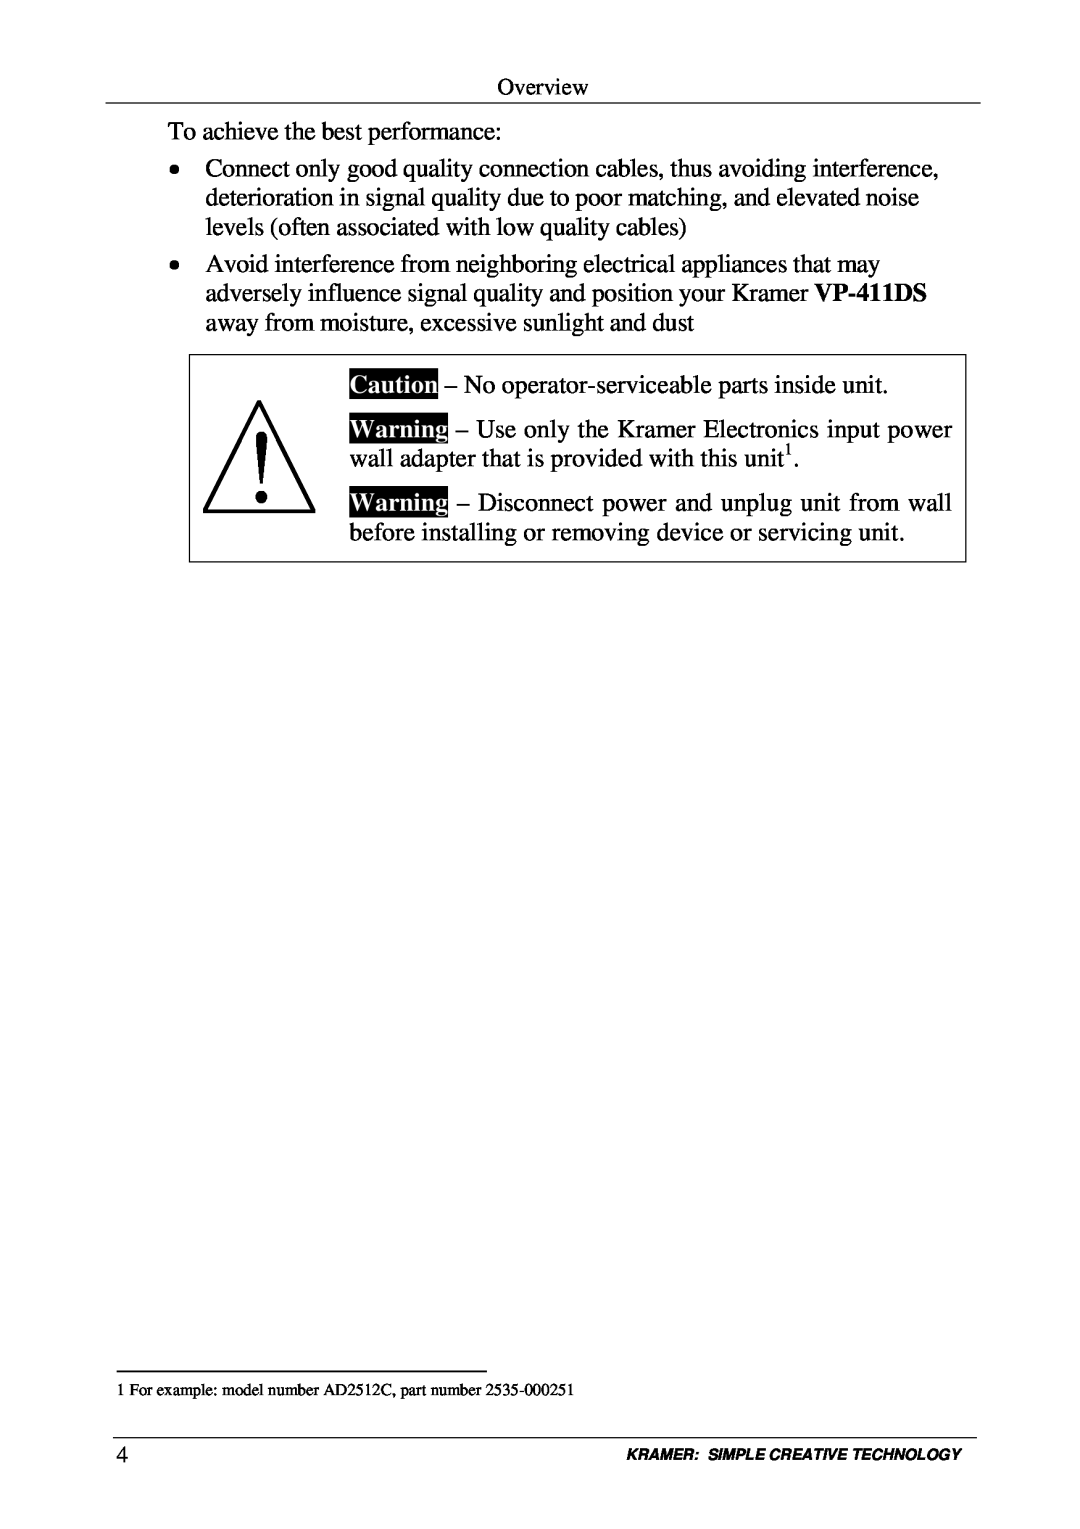 Kramer Electronics VP-411DS user manual To achieve the best performance 